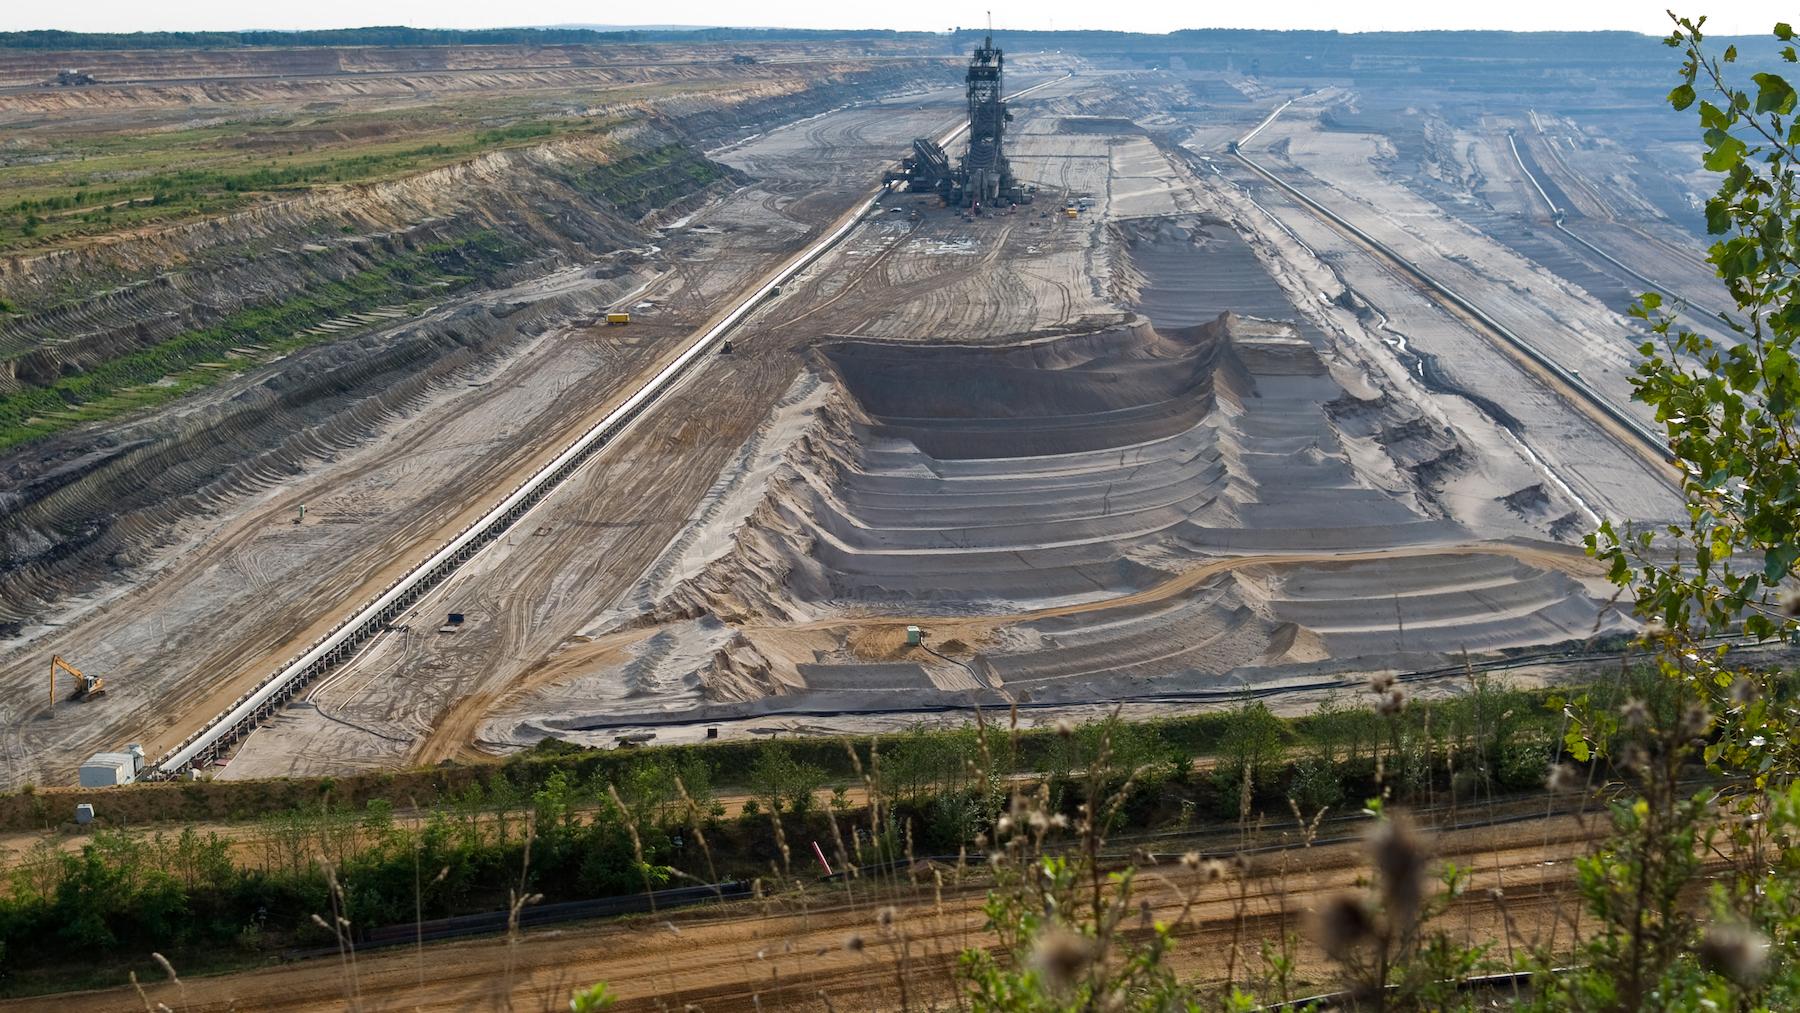 A section of the Hambach lignite mine in Germany's Rhineland coal fields, whose coal-fired power plants, run by power giant RWE, are one of Europe's largest sources of CO2 emissions.